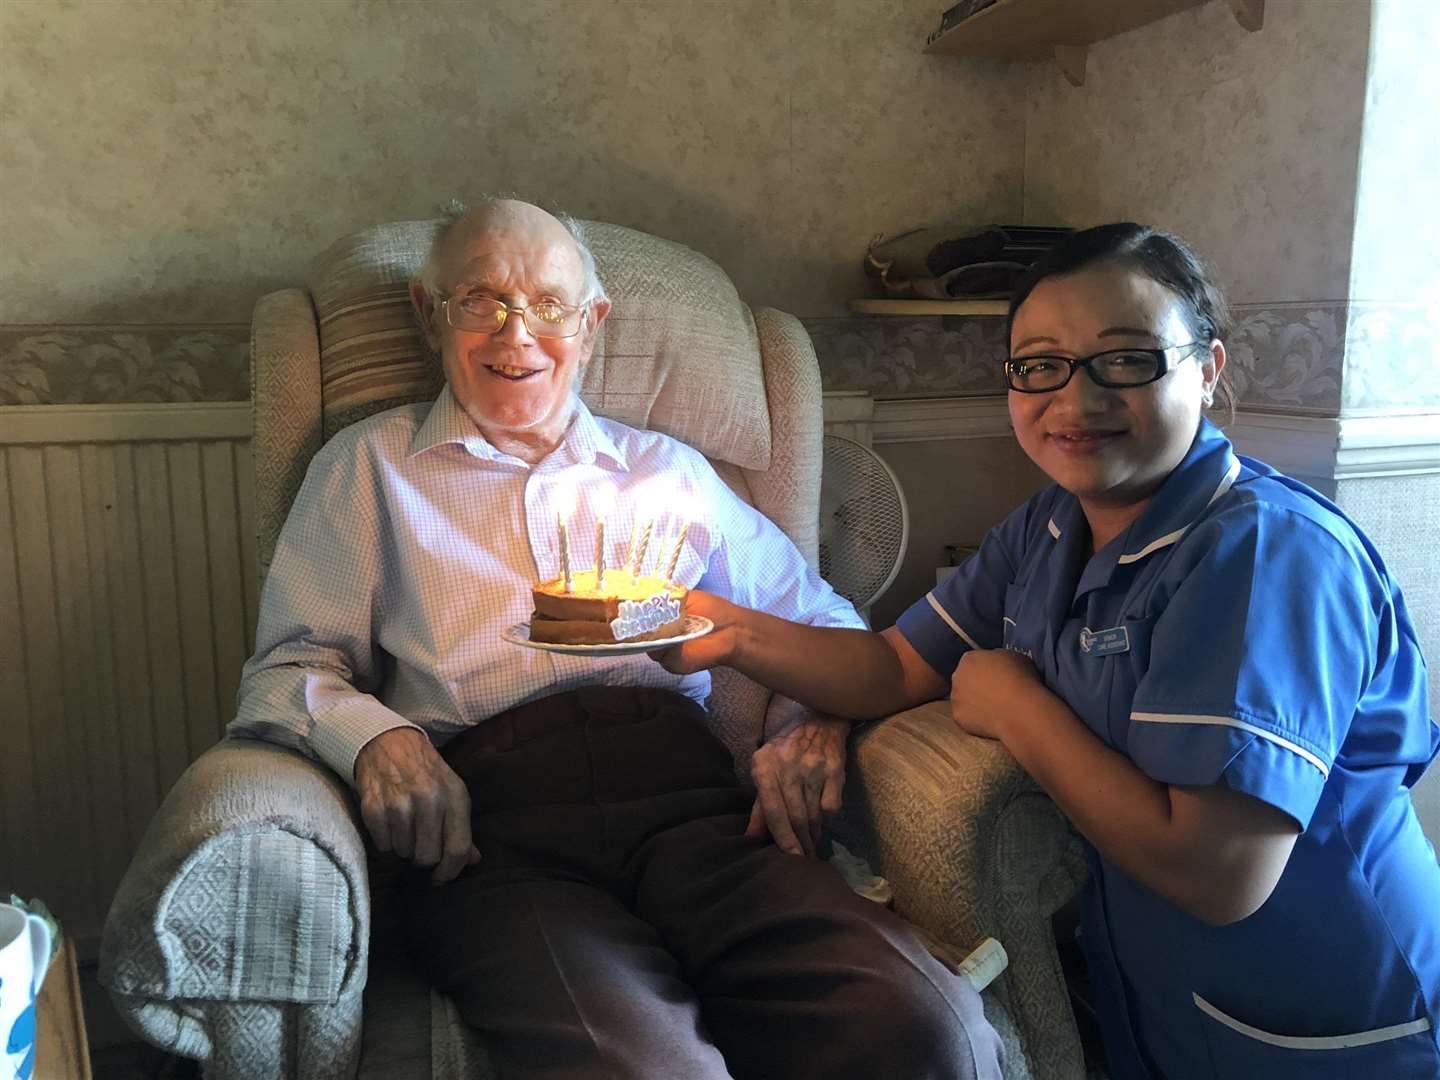 Ken Cordner celebrated his 90th birthday with fish and chips and a cake